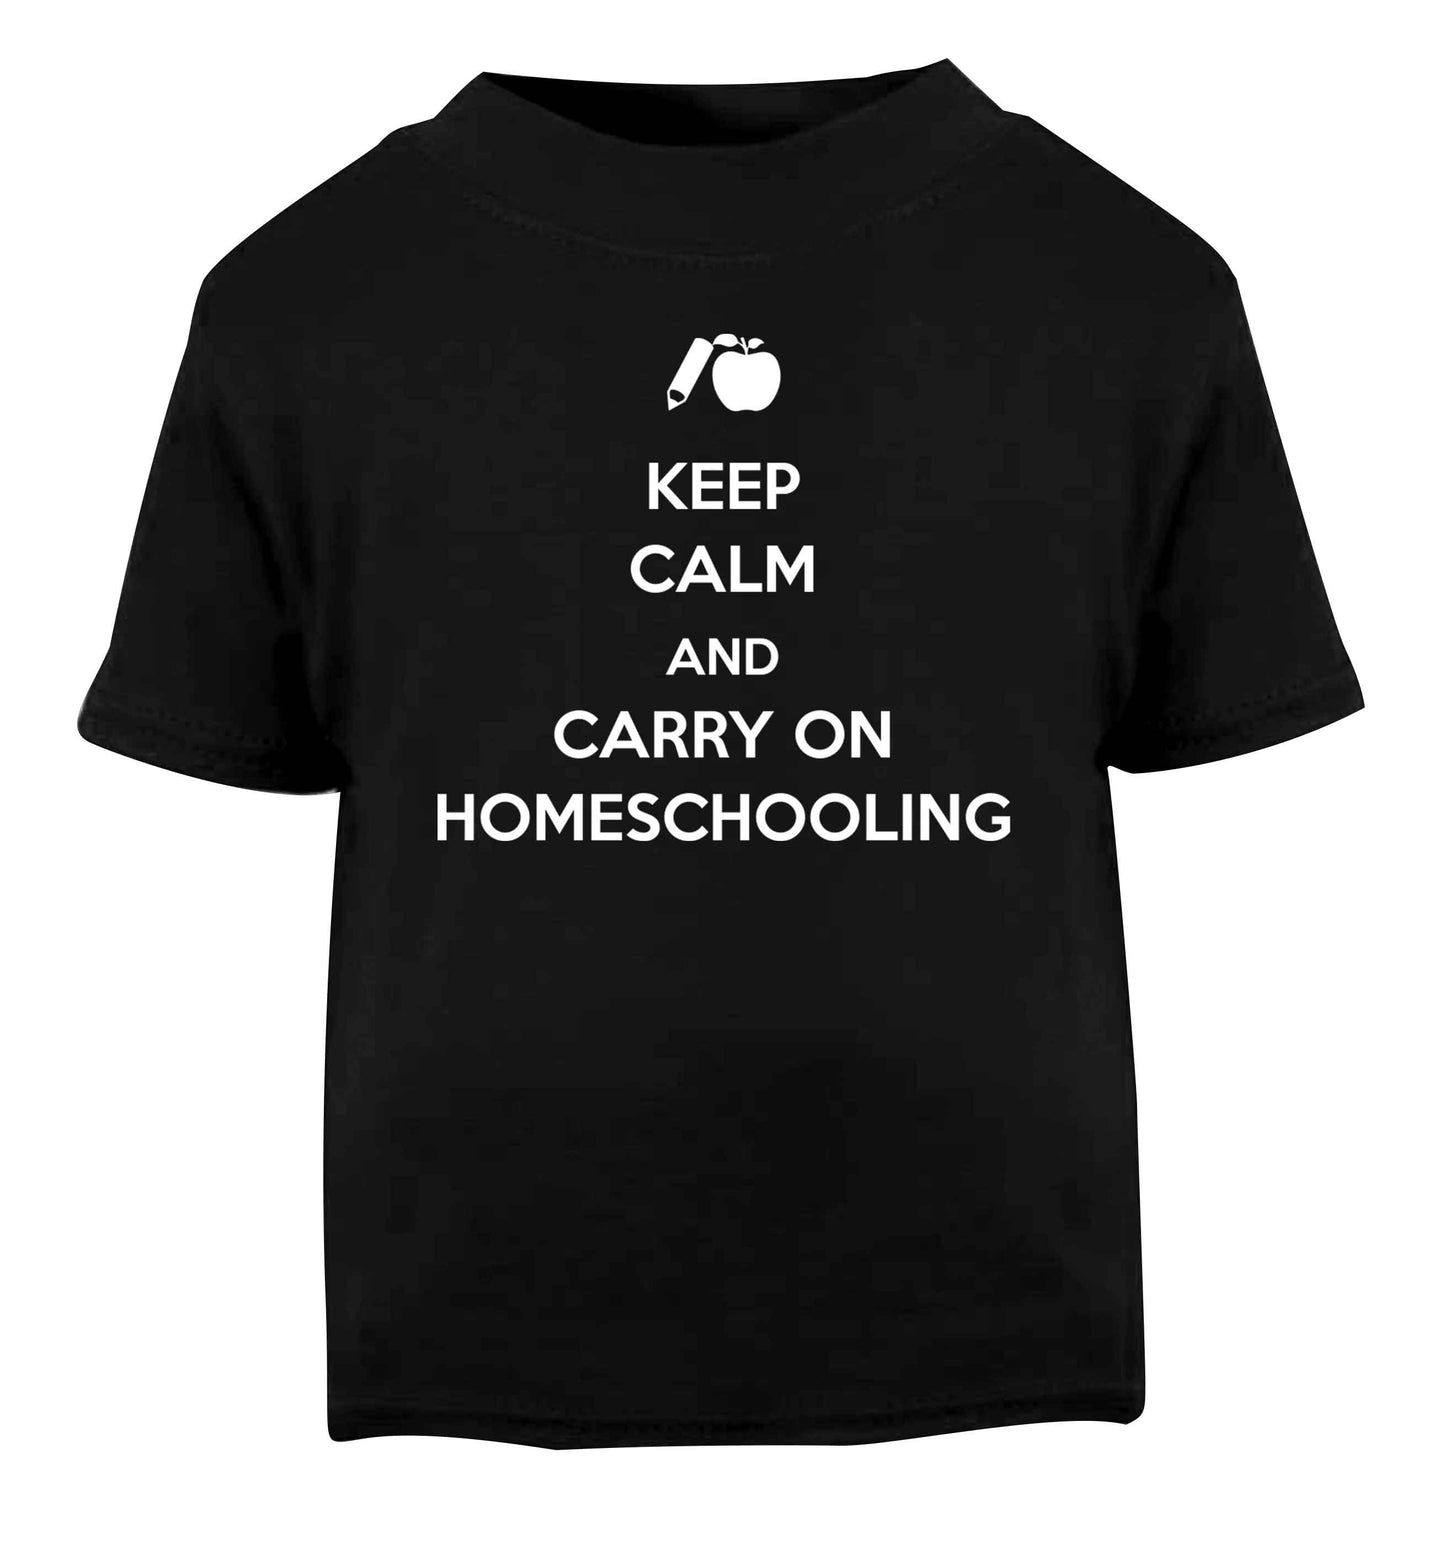 Keep calm and carry on homeschooling Black Baby Toddler Tshirt 2 years